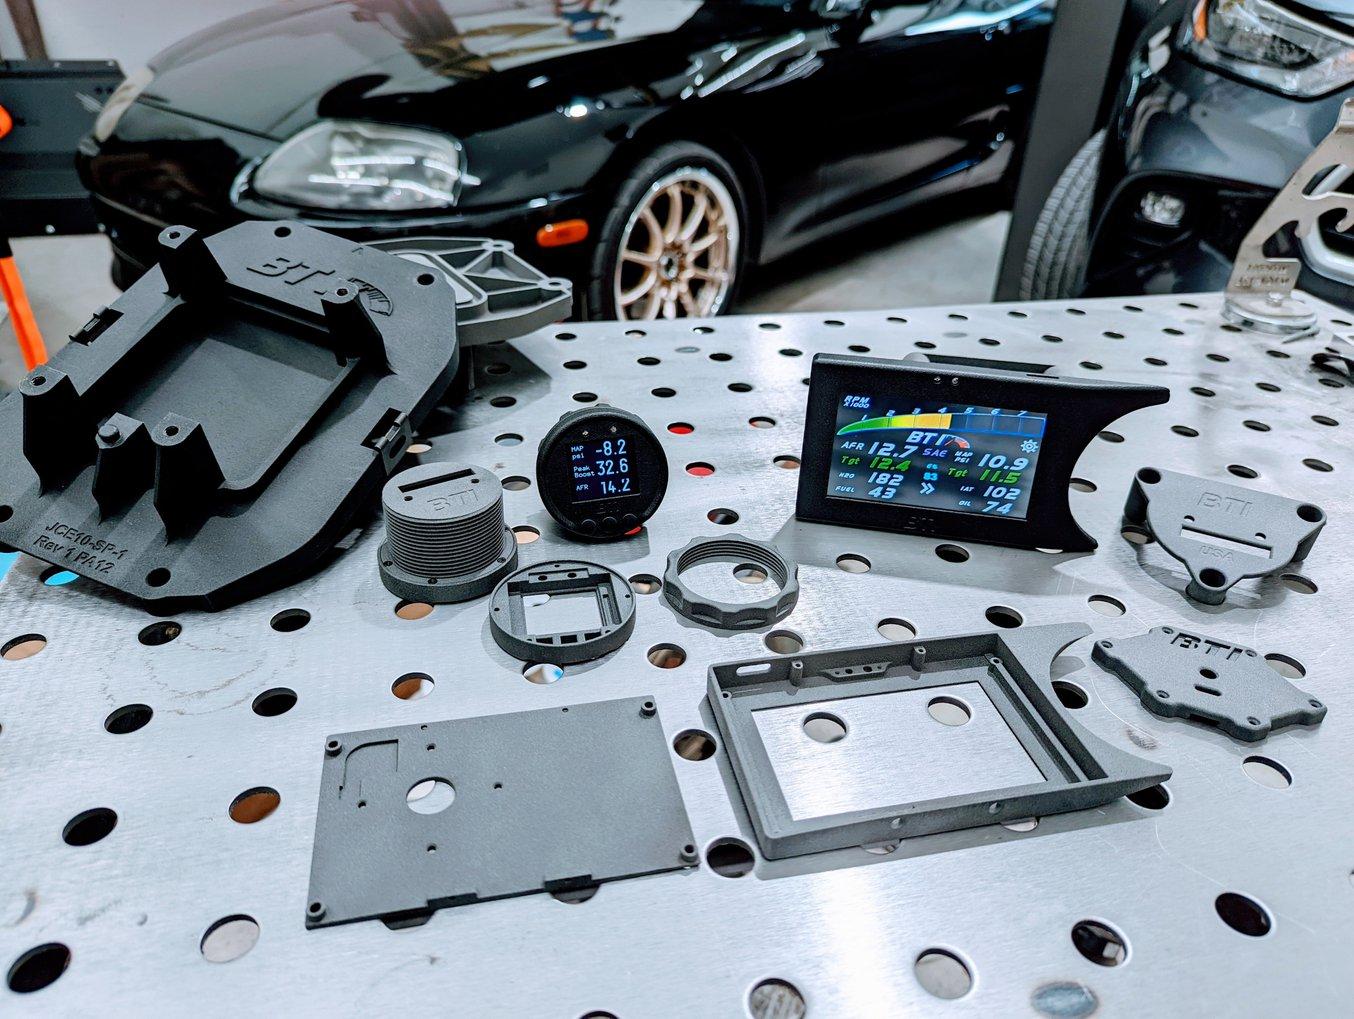 Telemetry displays for high-performance cars.